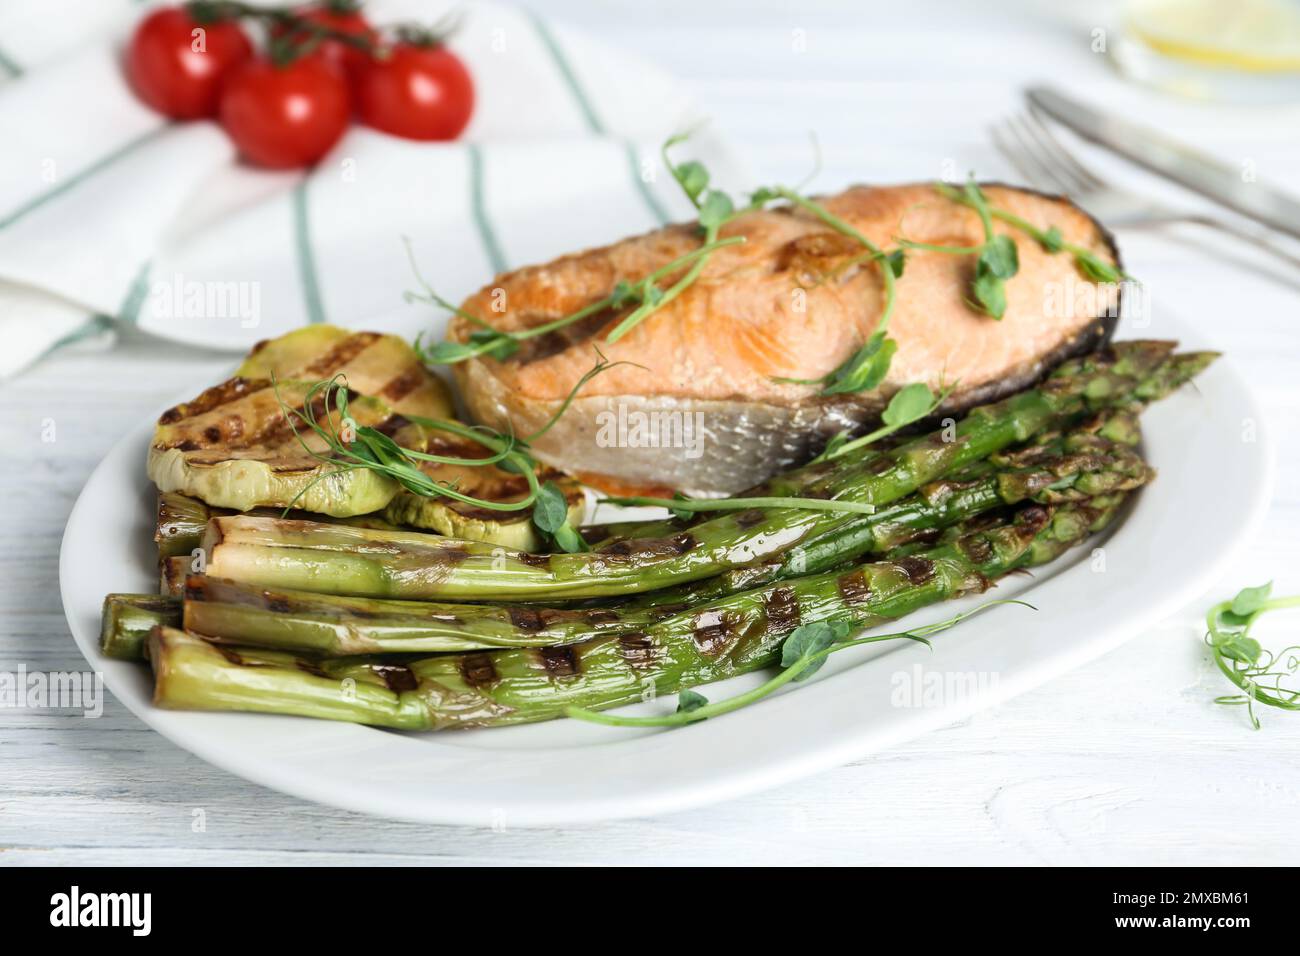 Tasty salmon steak served with grilled asparagus on plate Stock Photo